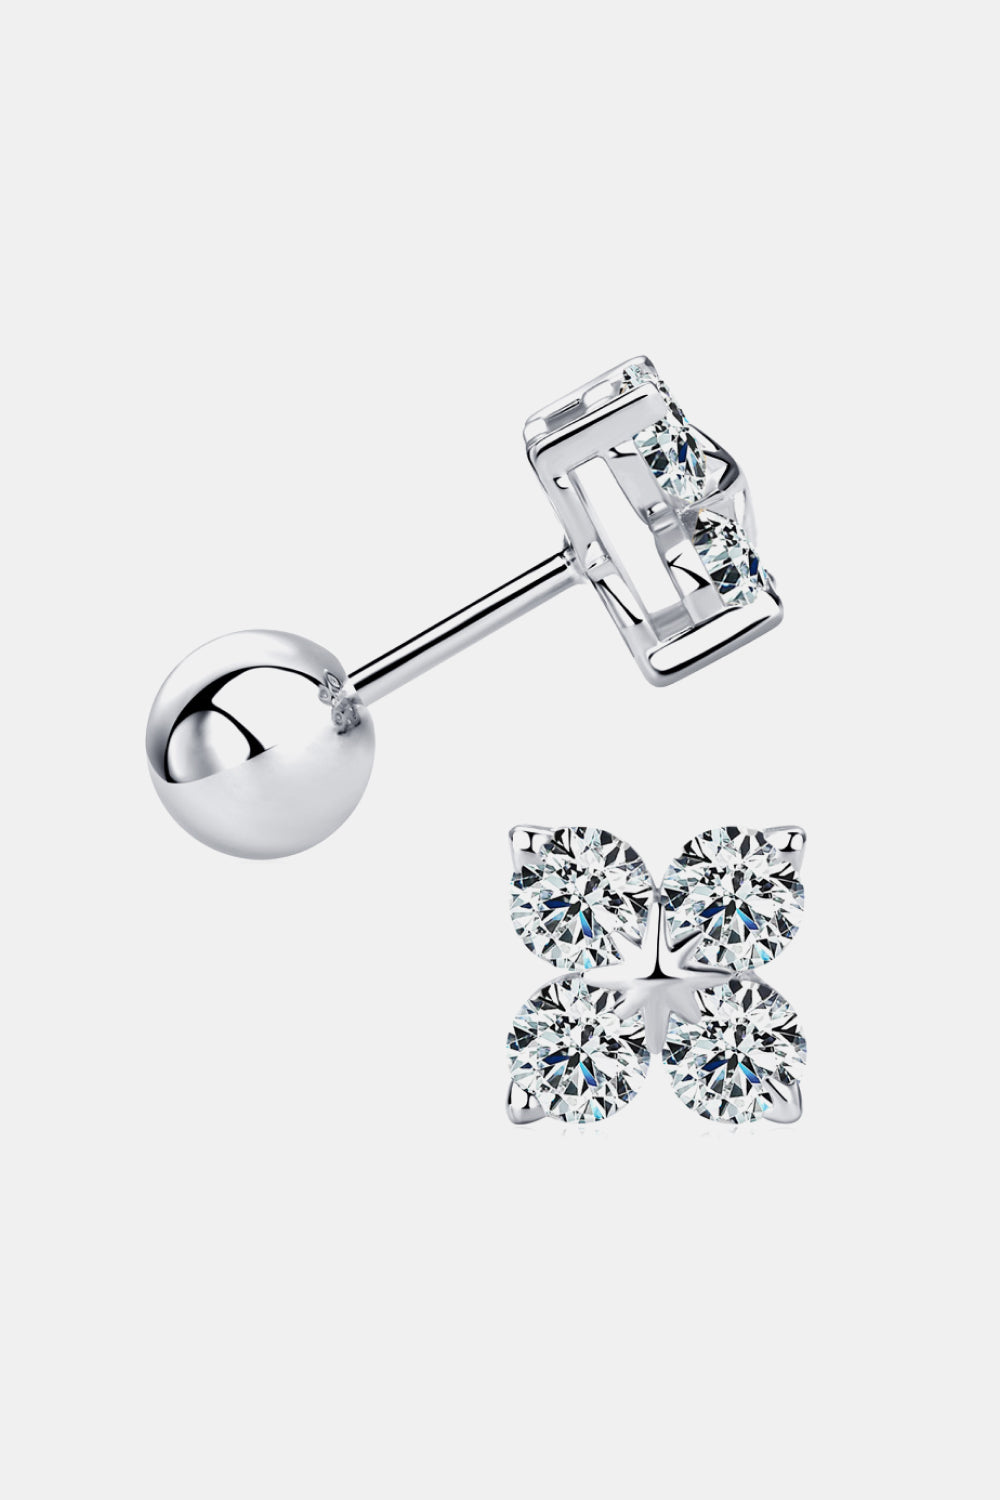 Moissanite 925 Sterling Silver Four-Leaf Clover Shape Earrings-Earrings-Inspired by Justeen-Women's Clothing Boutique in Chicago, Illinois